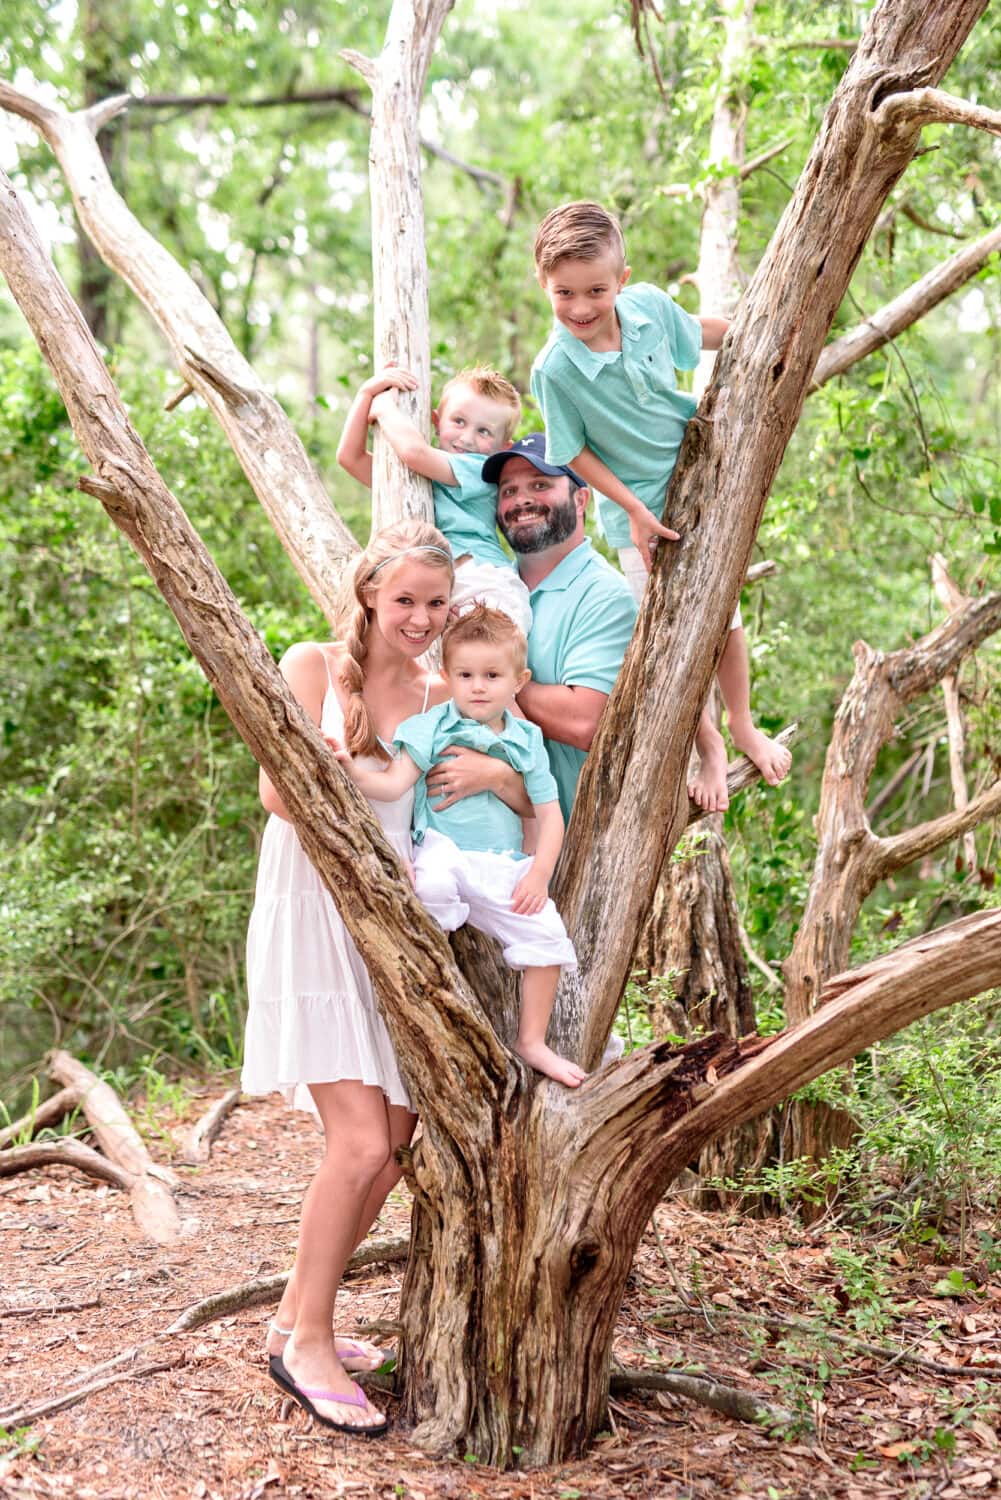 Family having fun in the old oak tree - Myrtle Beach State Park